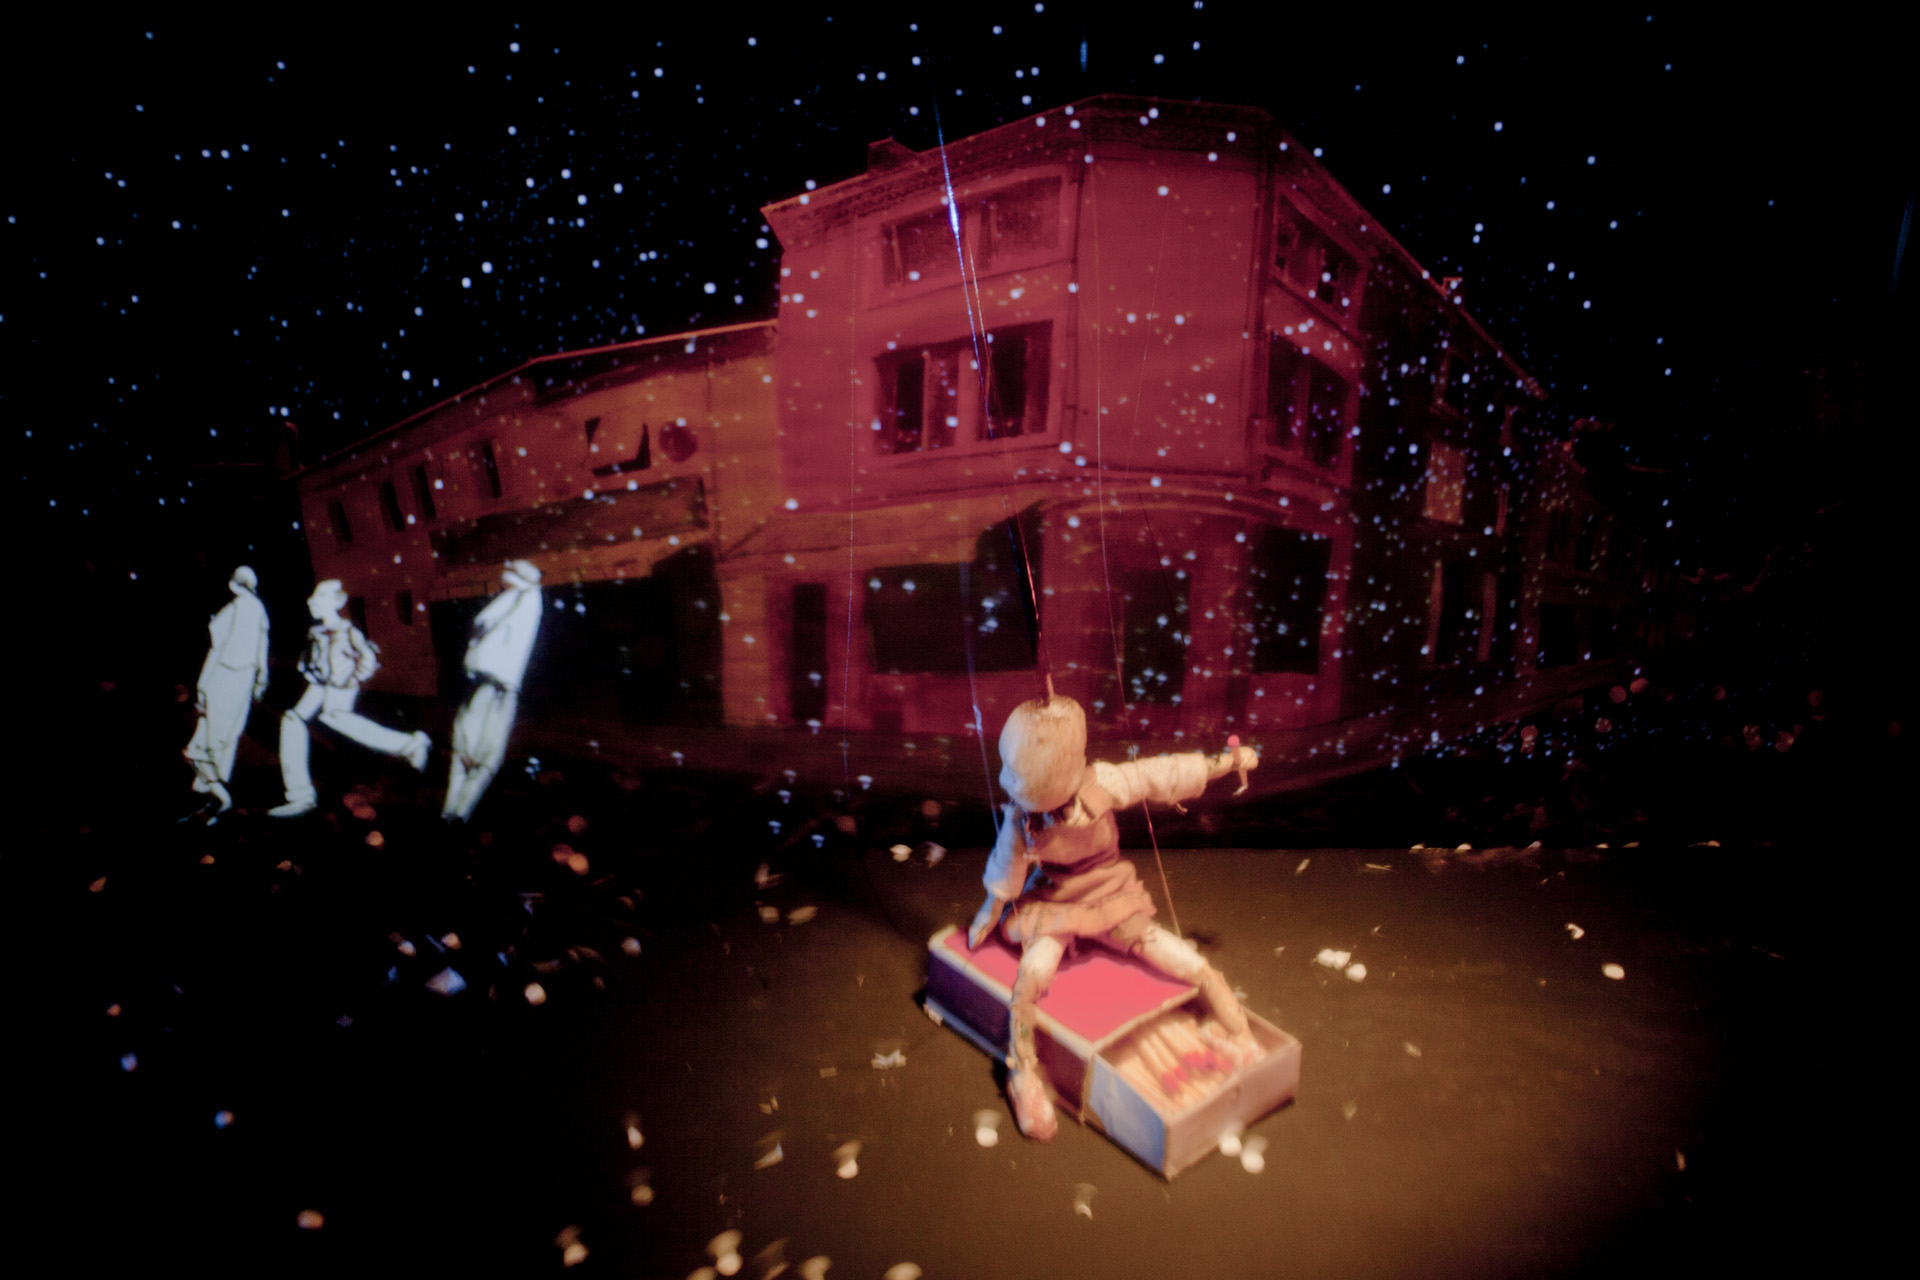 Step into Atelier Act3’s world with a personalized puppet light show, using DMX for a captivating experience.